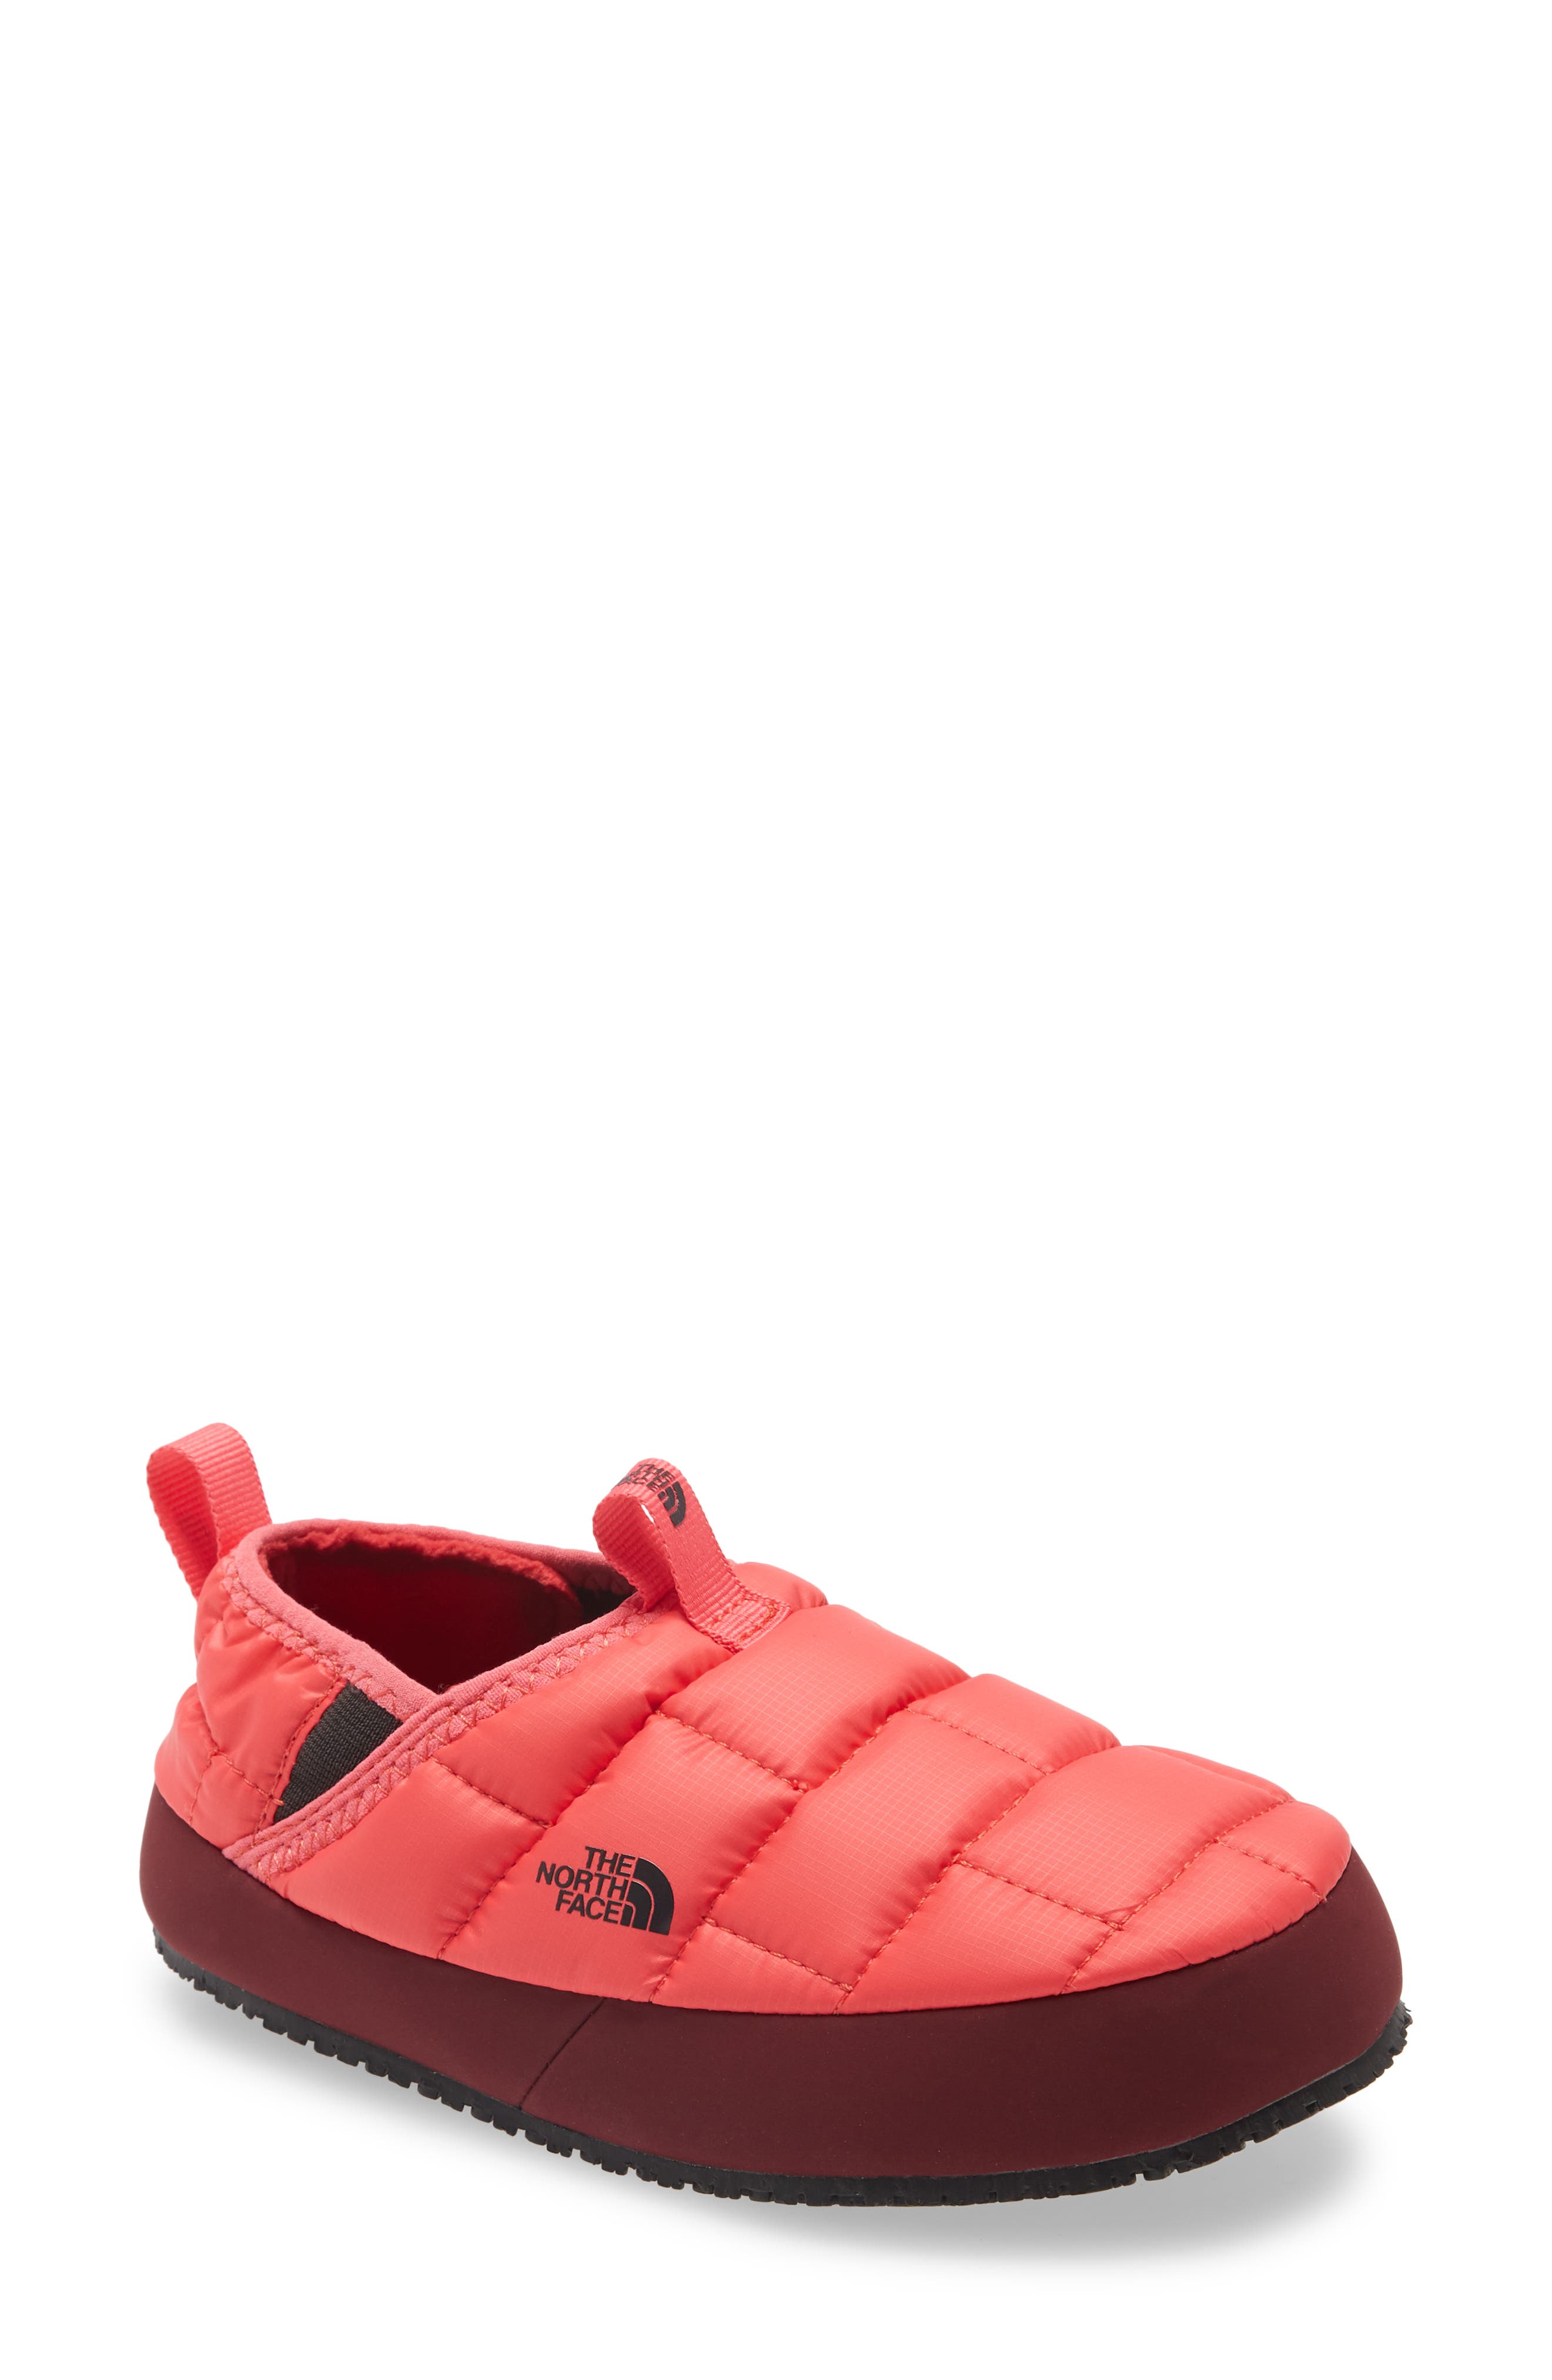 north face toddler shoes